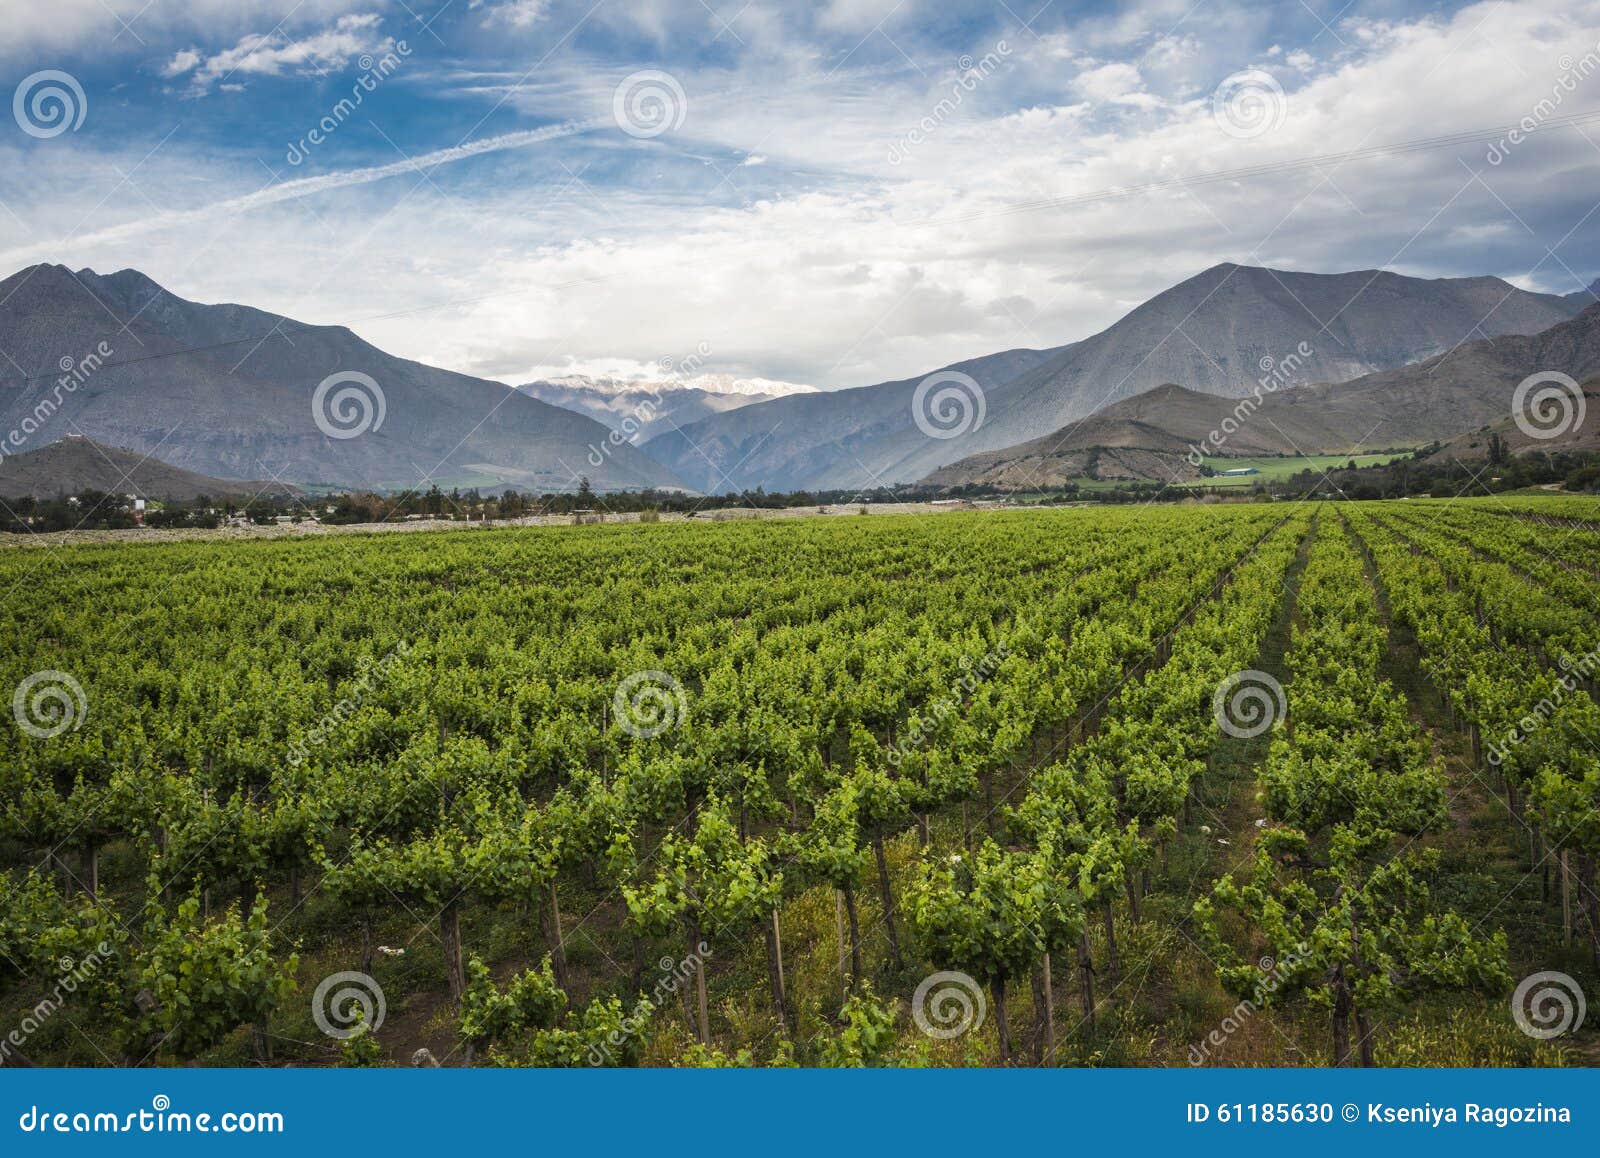 spring vineyard, elqui valley, andes, chile